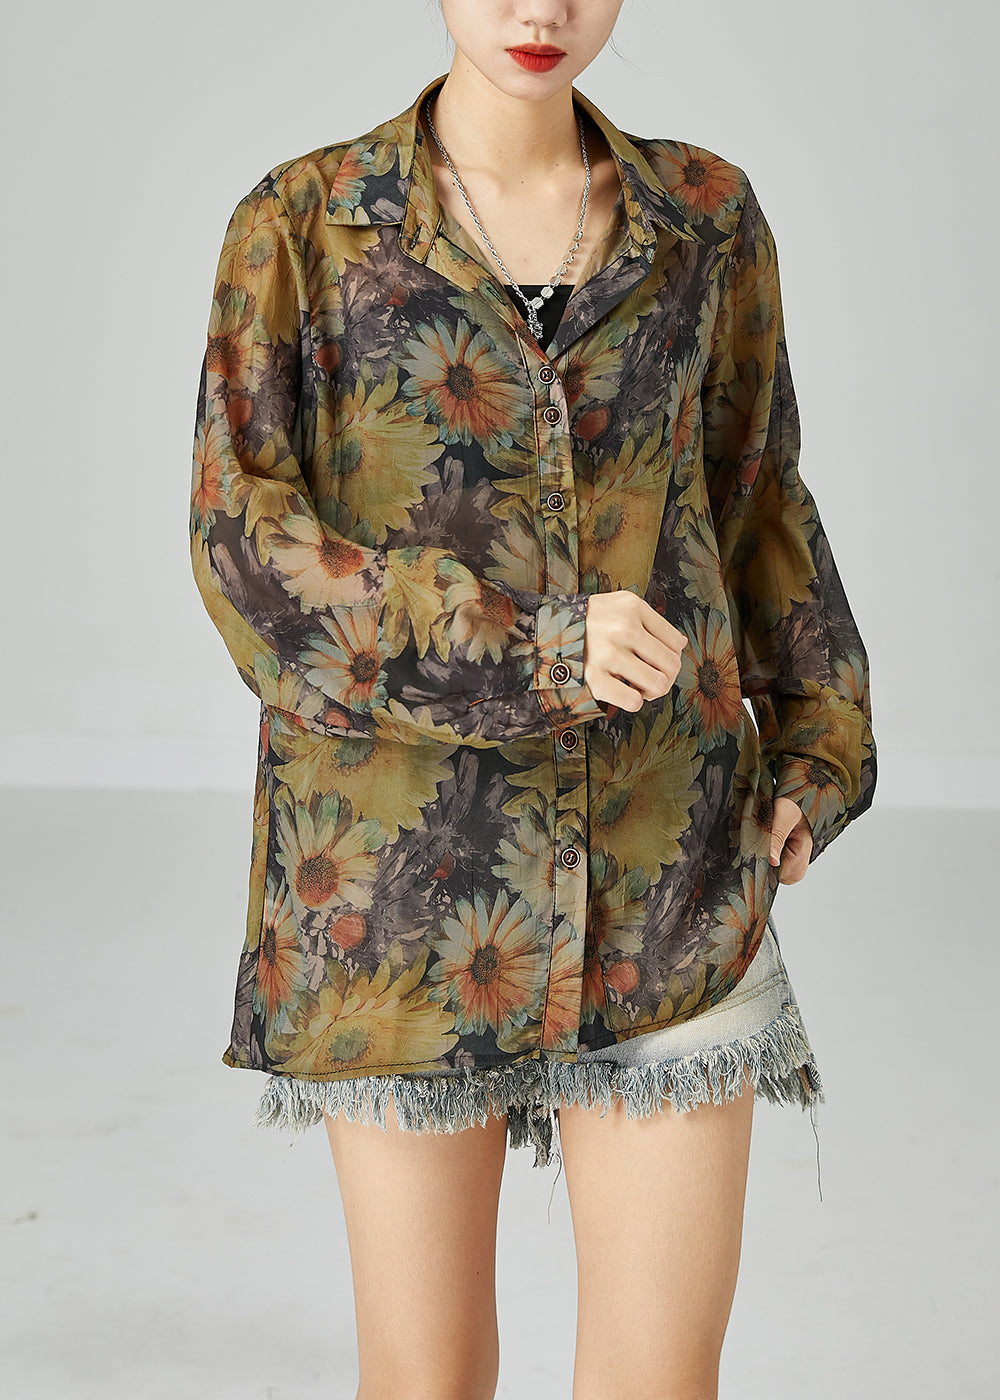 Fitted Khaki Oversized Sunflower Print Cotton Shirt Top Spring LY2443